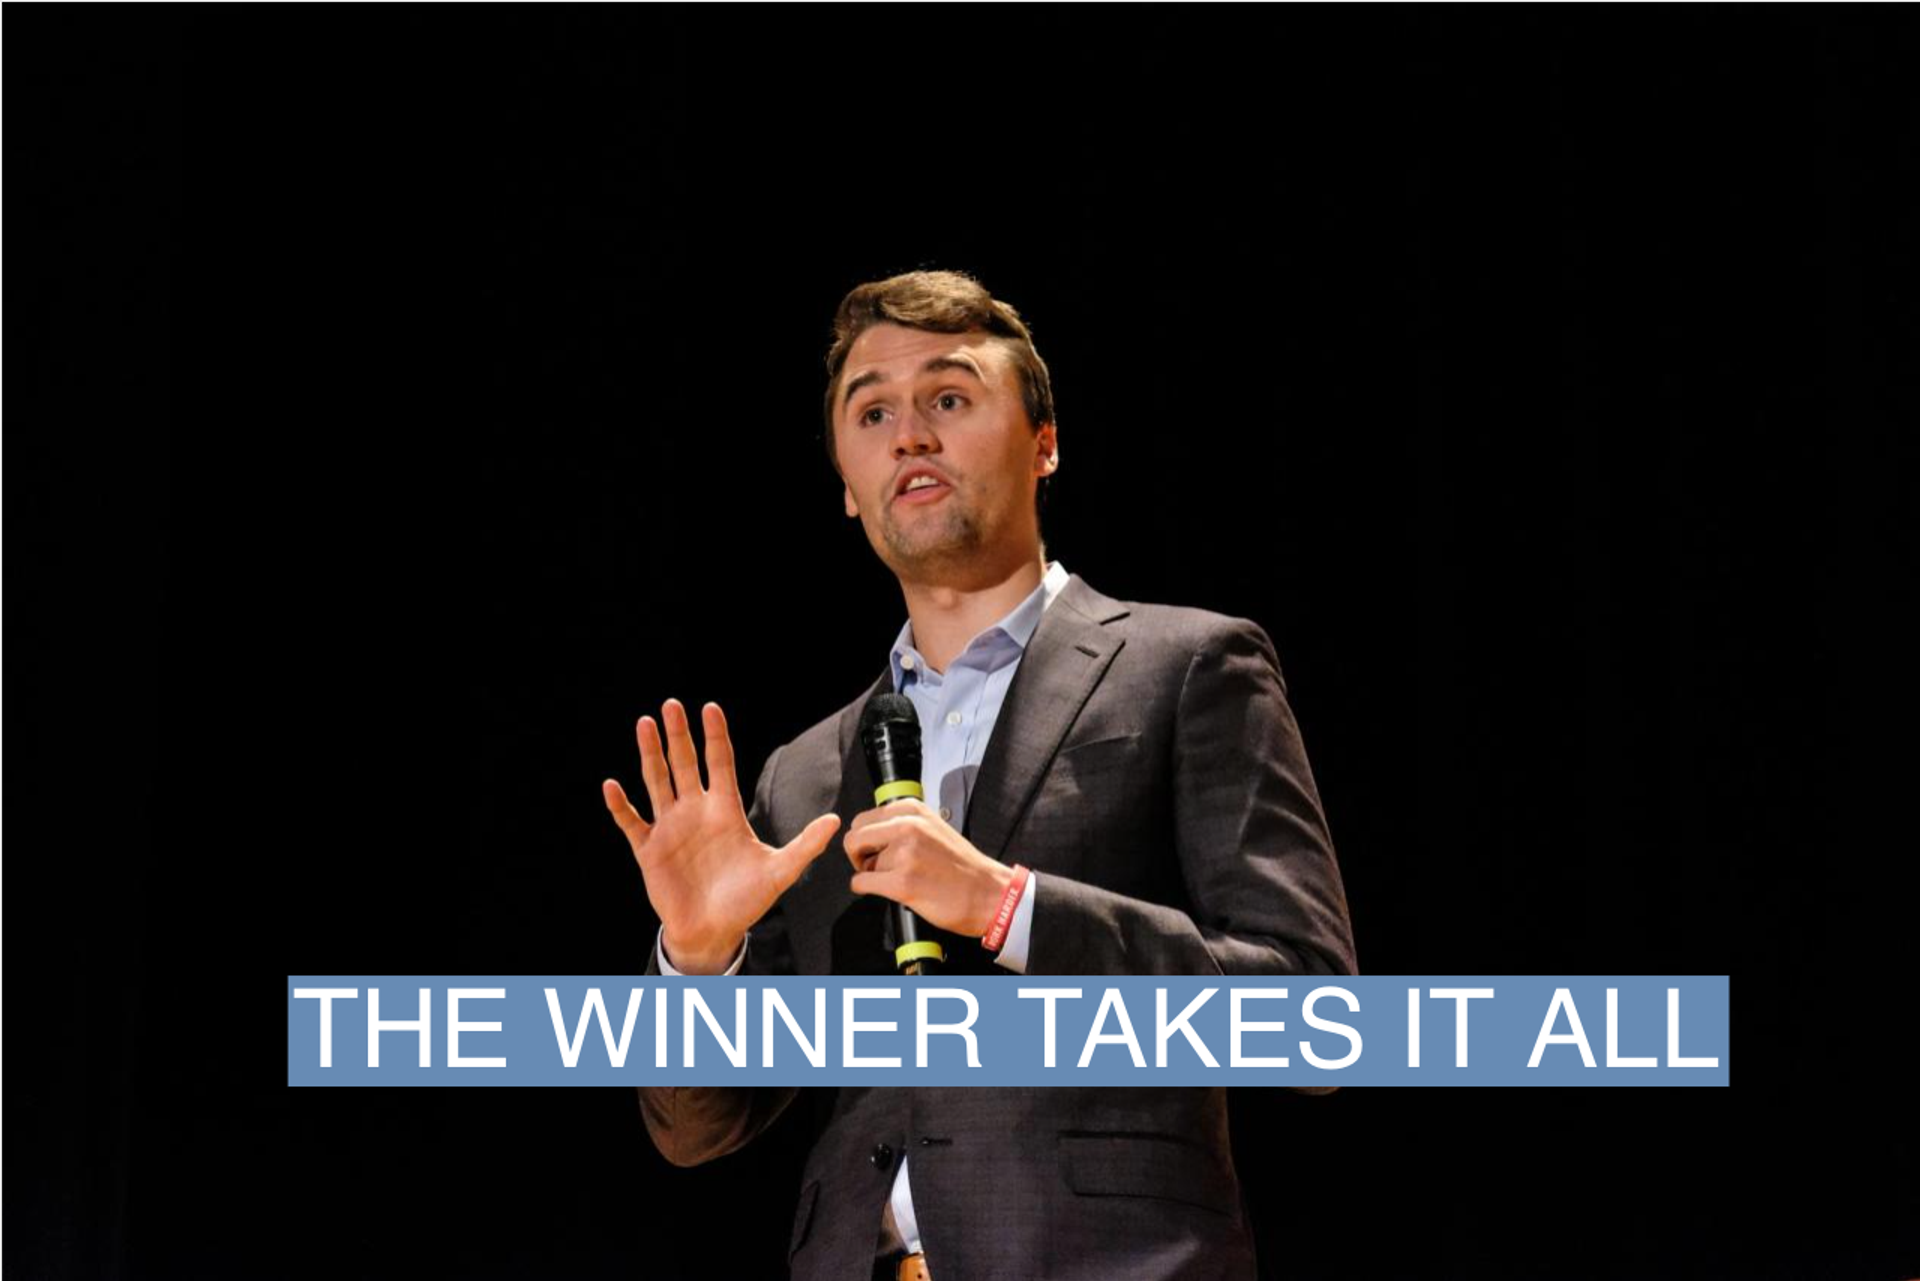 Charlie Kirk speaks at Culture War Turning Point USA event at the Ohio State University in Columbus, Ohio, on Oct. 29, 2019.